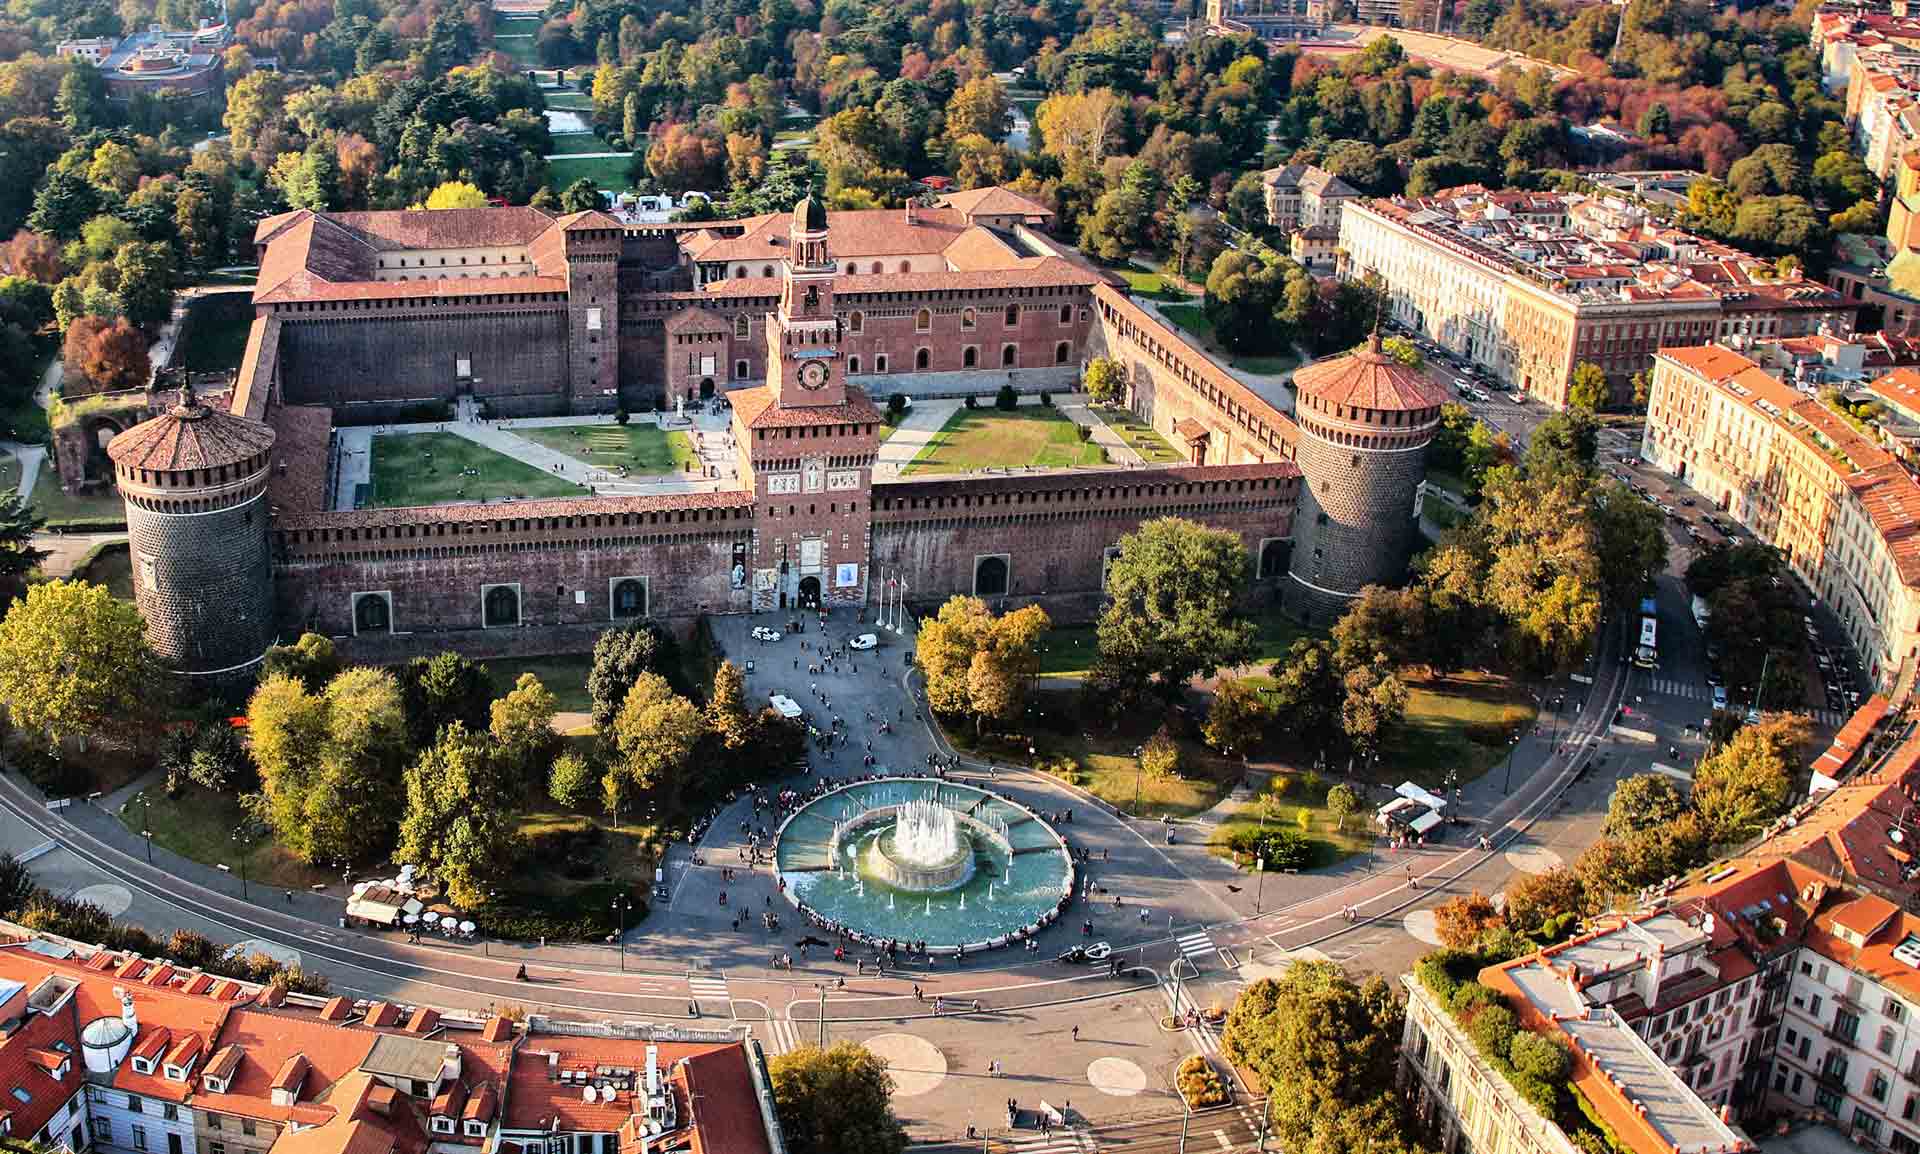 Aerial view of Sforza Castle in Milano, with Parco Sempione in the background